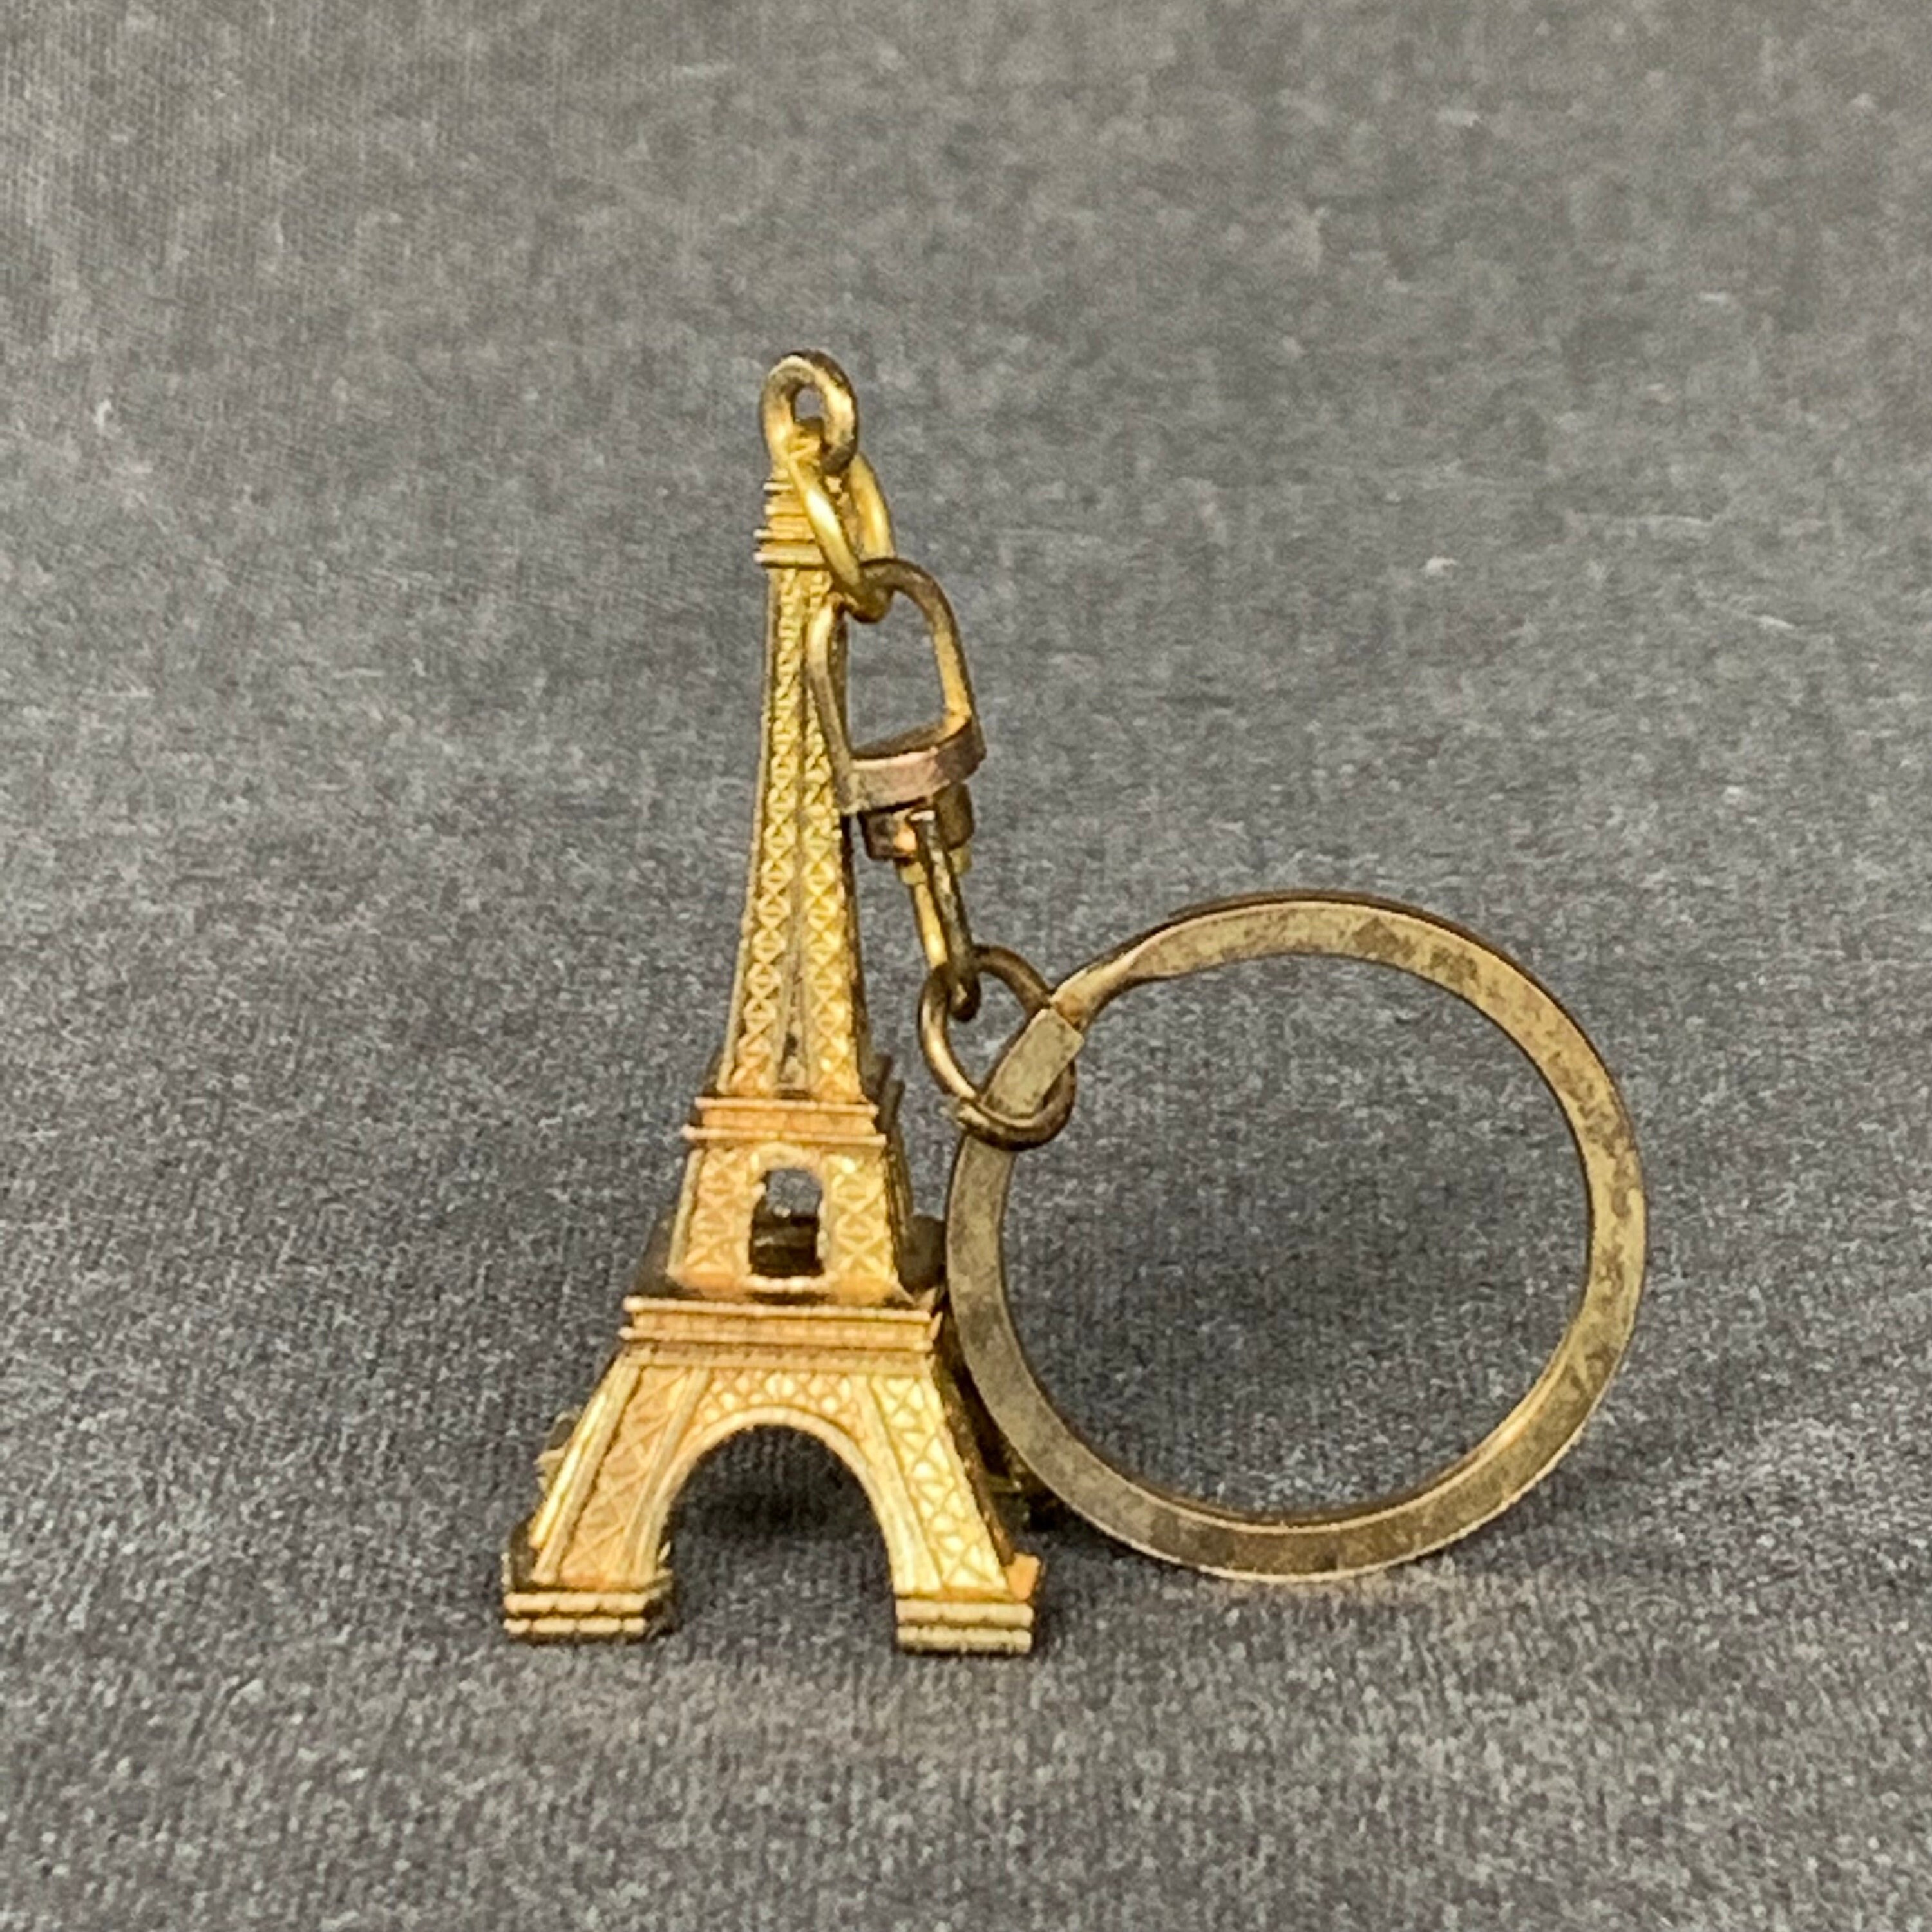 Retro Bronze Eiffel Tower Keychain Paris Tour Mini Decoration For Womens  Bag And Key Ring Photo Holder G291i From Dfew821, $15.13